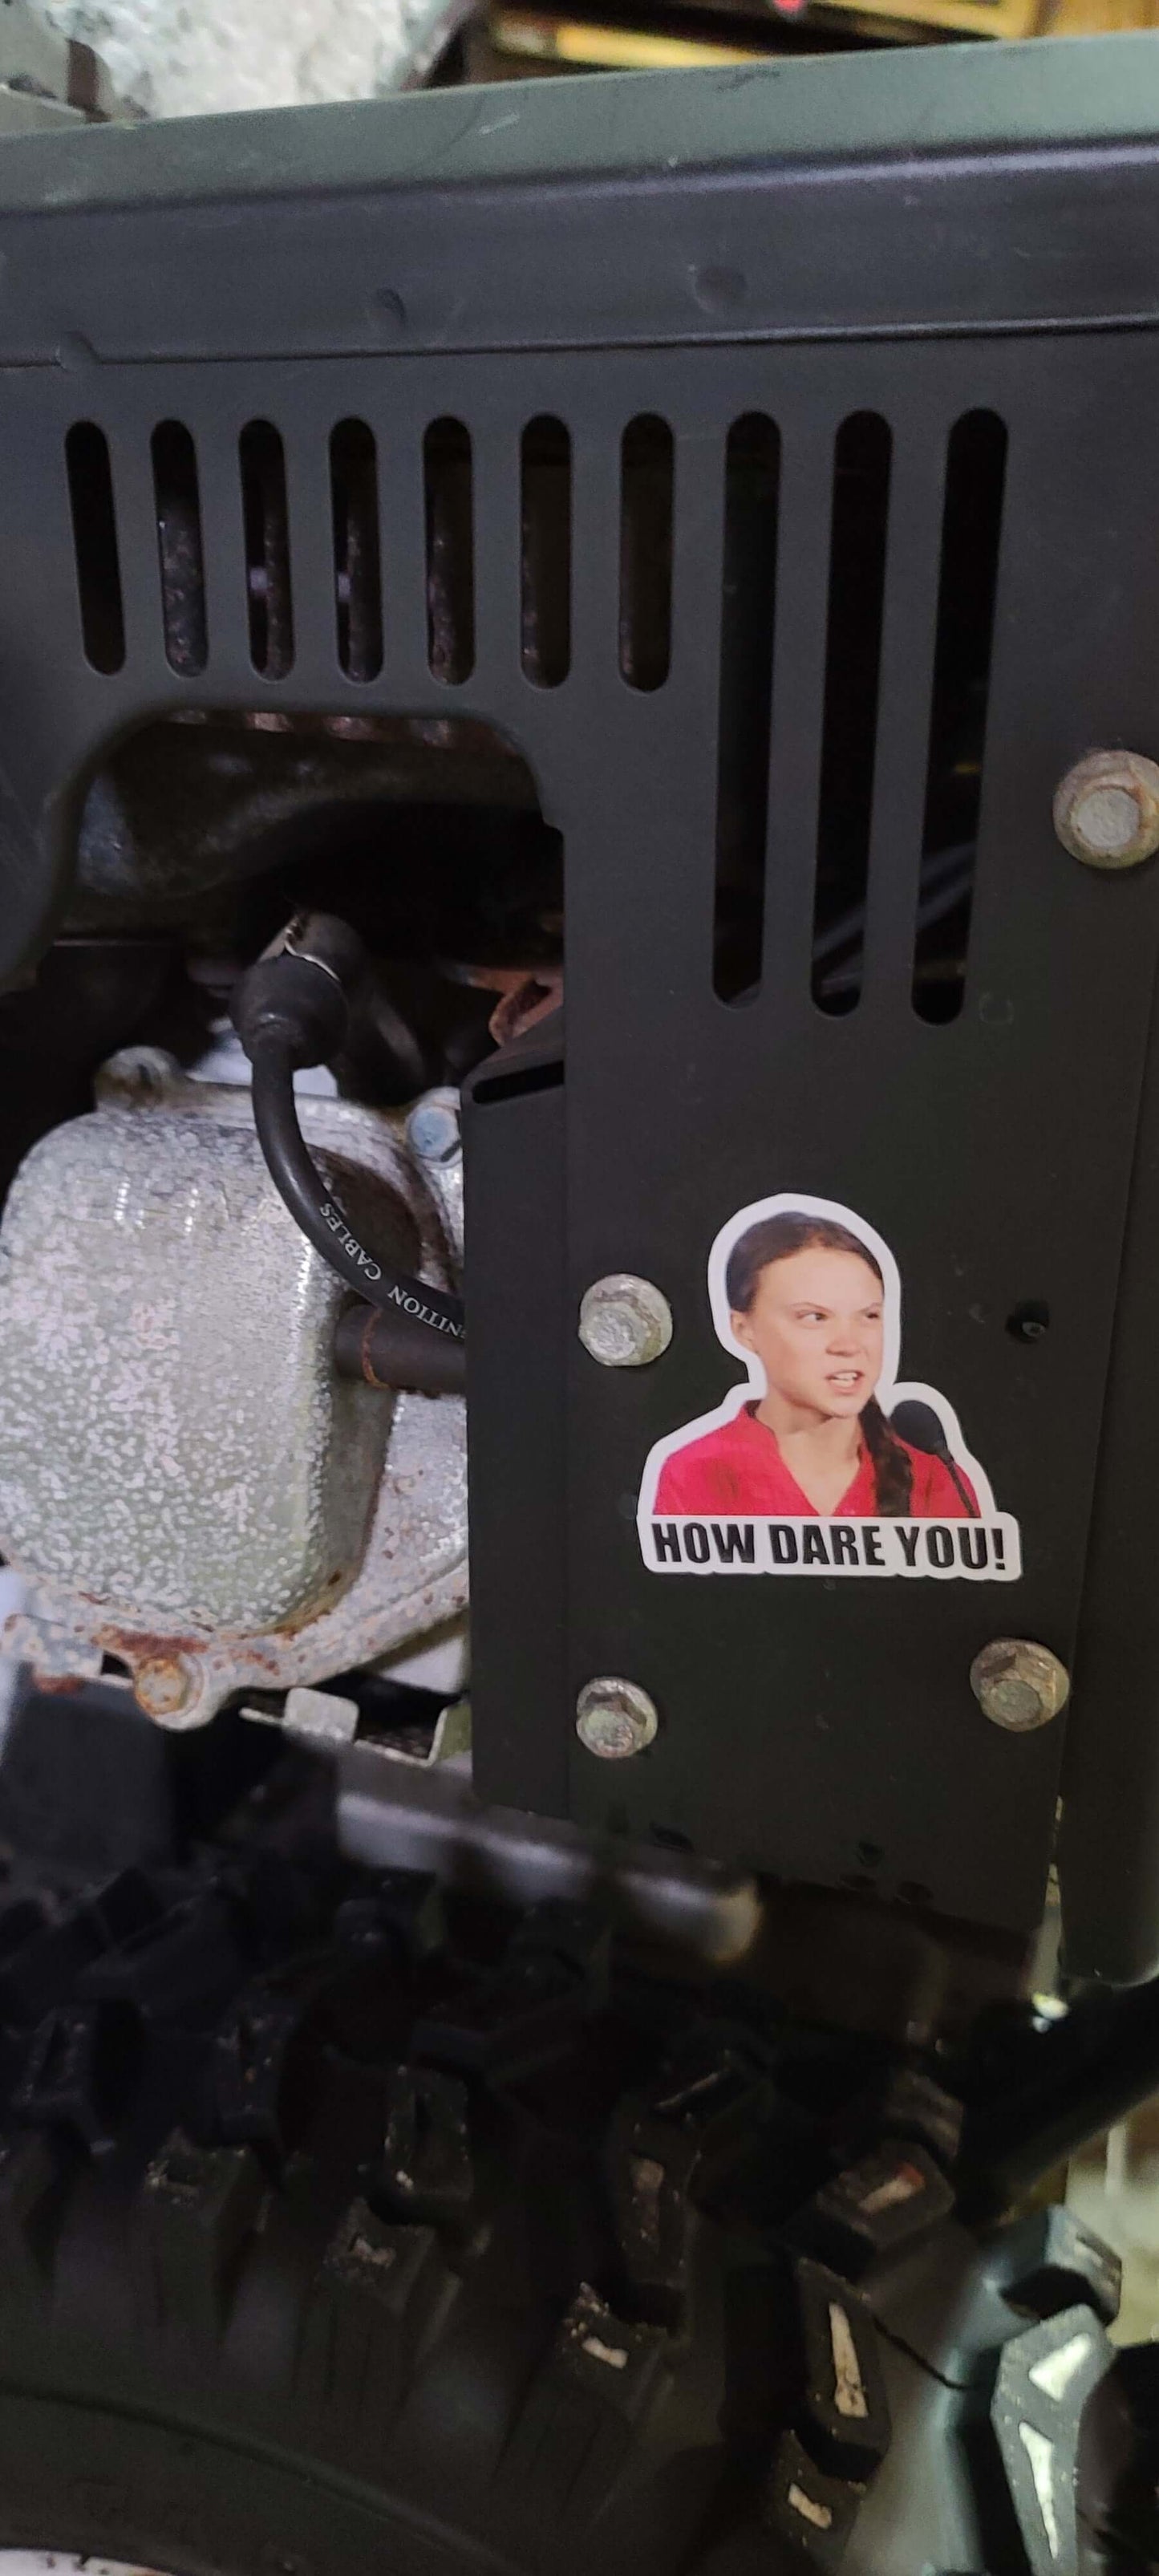 How DARE you - Bubble-free sticker for your gas tank / lawn mower / snow blower / leaf blower / gas engine climate change Climate change sticker gas engine gasoline global warming global warming sticker greta sticker gretta gretta sticker Gretta Thurnburg Gretta Thurnburg sticker